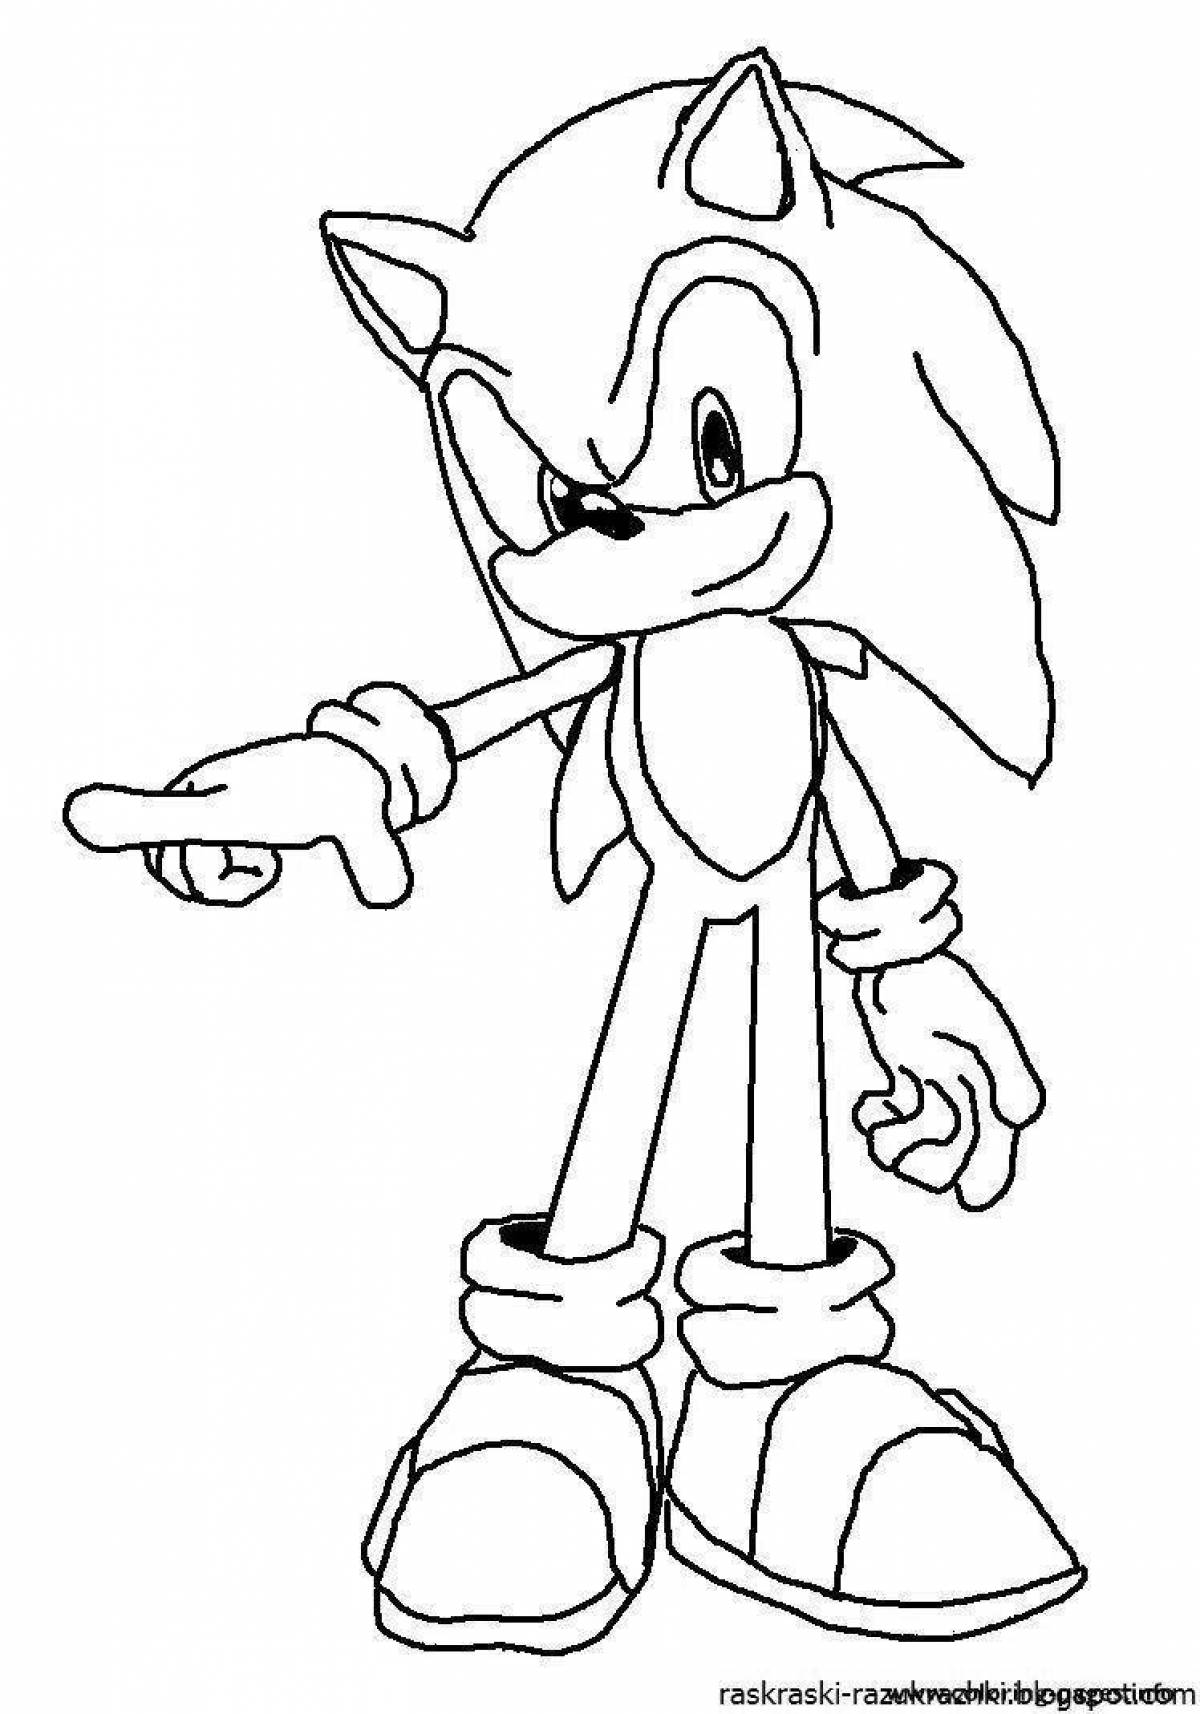 Cool sonic boom coloring book